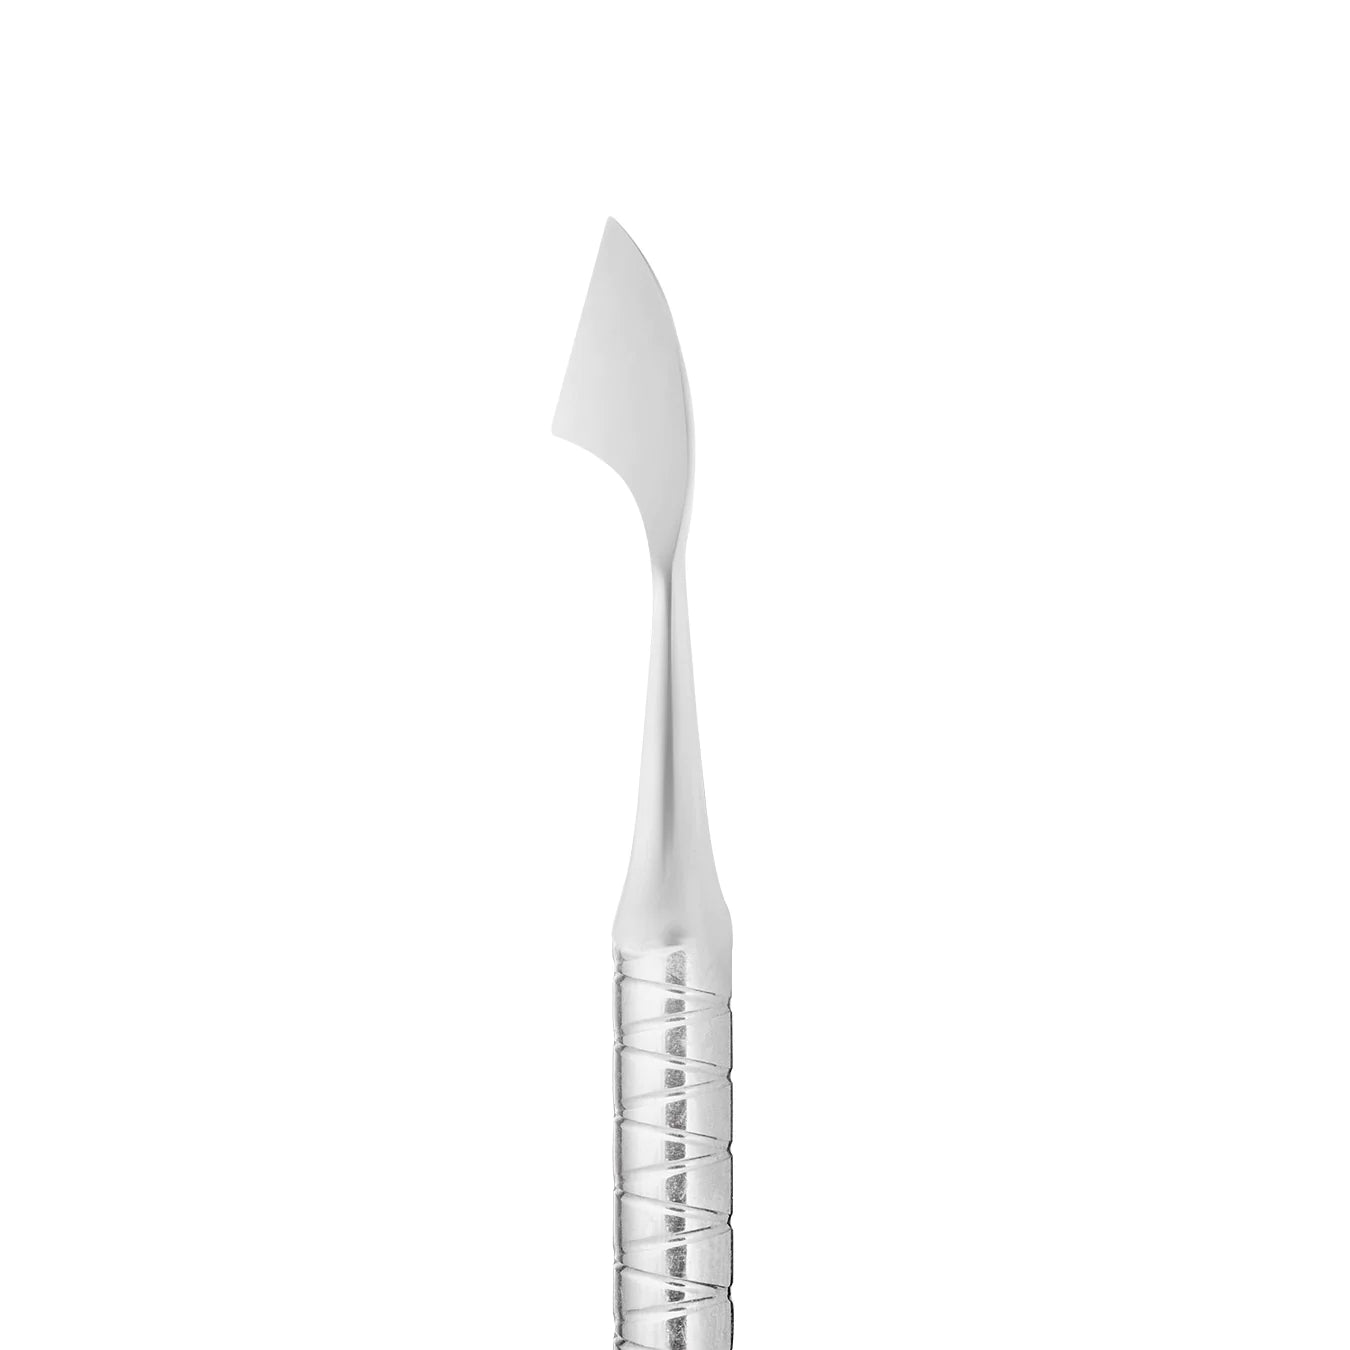 Cuticle pusher CLASSIC 30 TYPE 2 (rounded pusher and remover) -PC-30-2